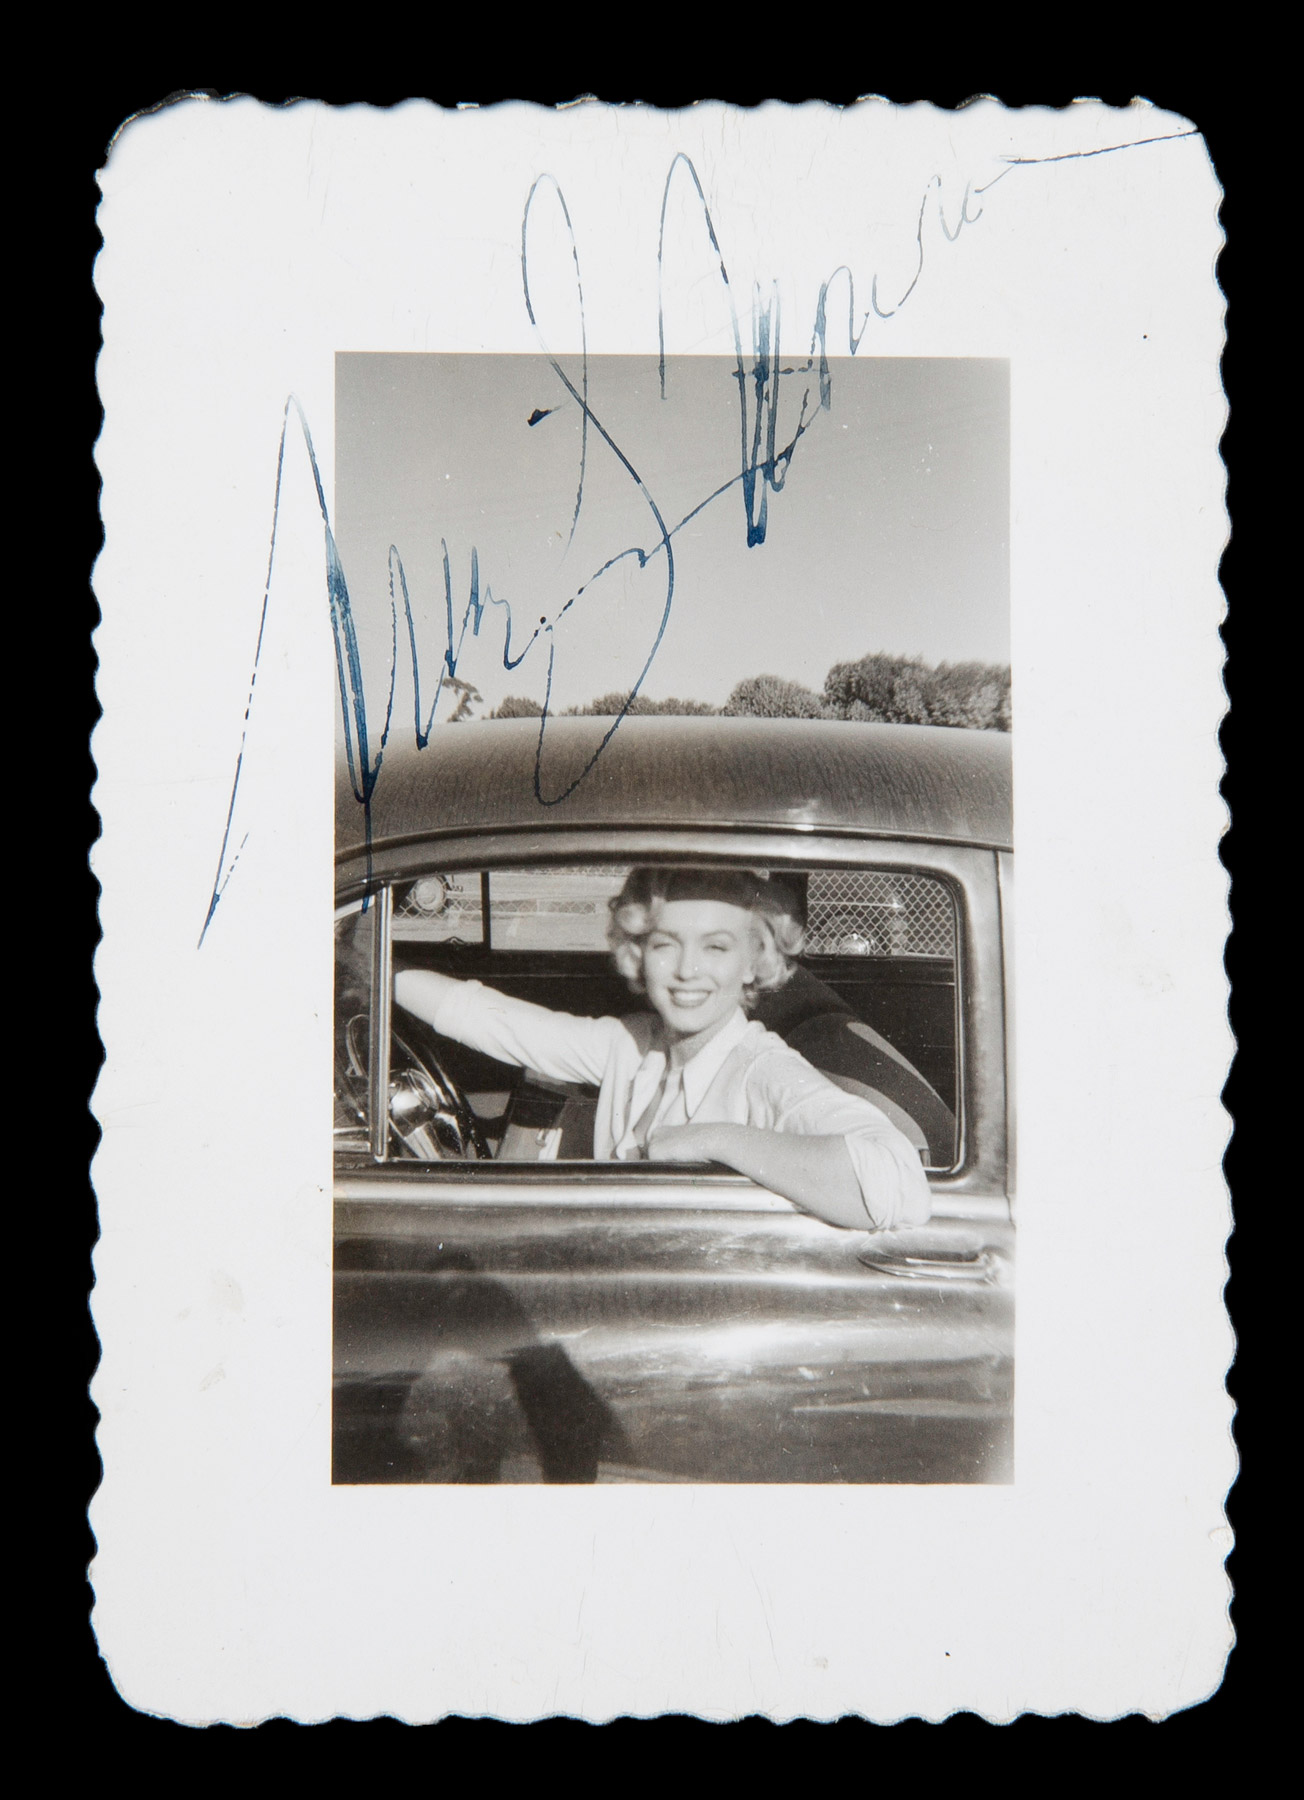 Marilyn Monroe driving a car and posing through the driver's side window taken in the mid-1950s.